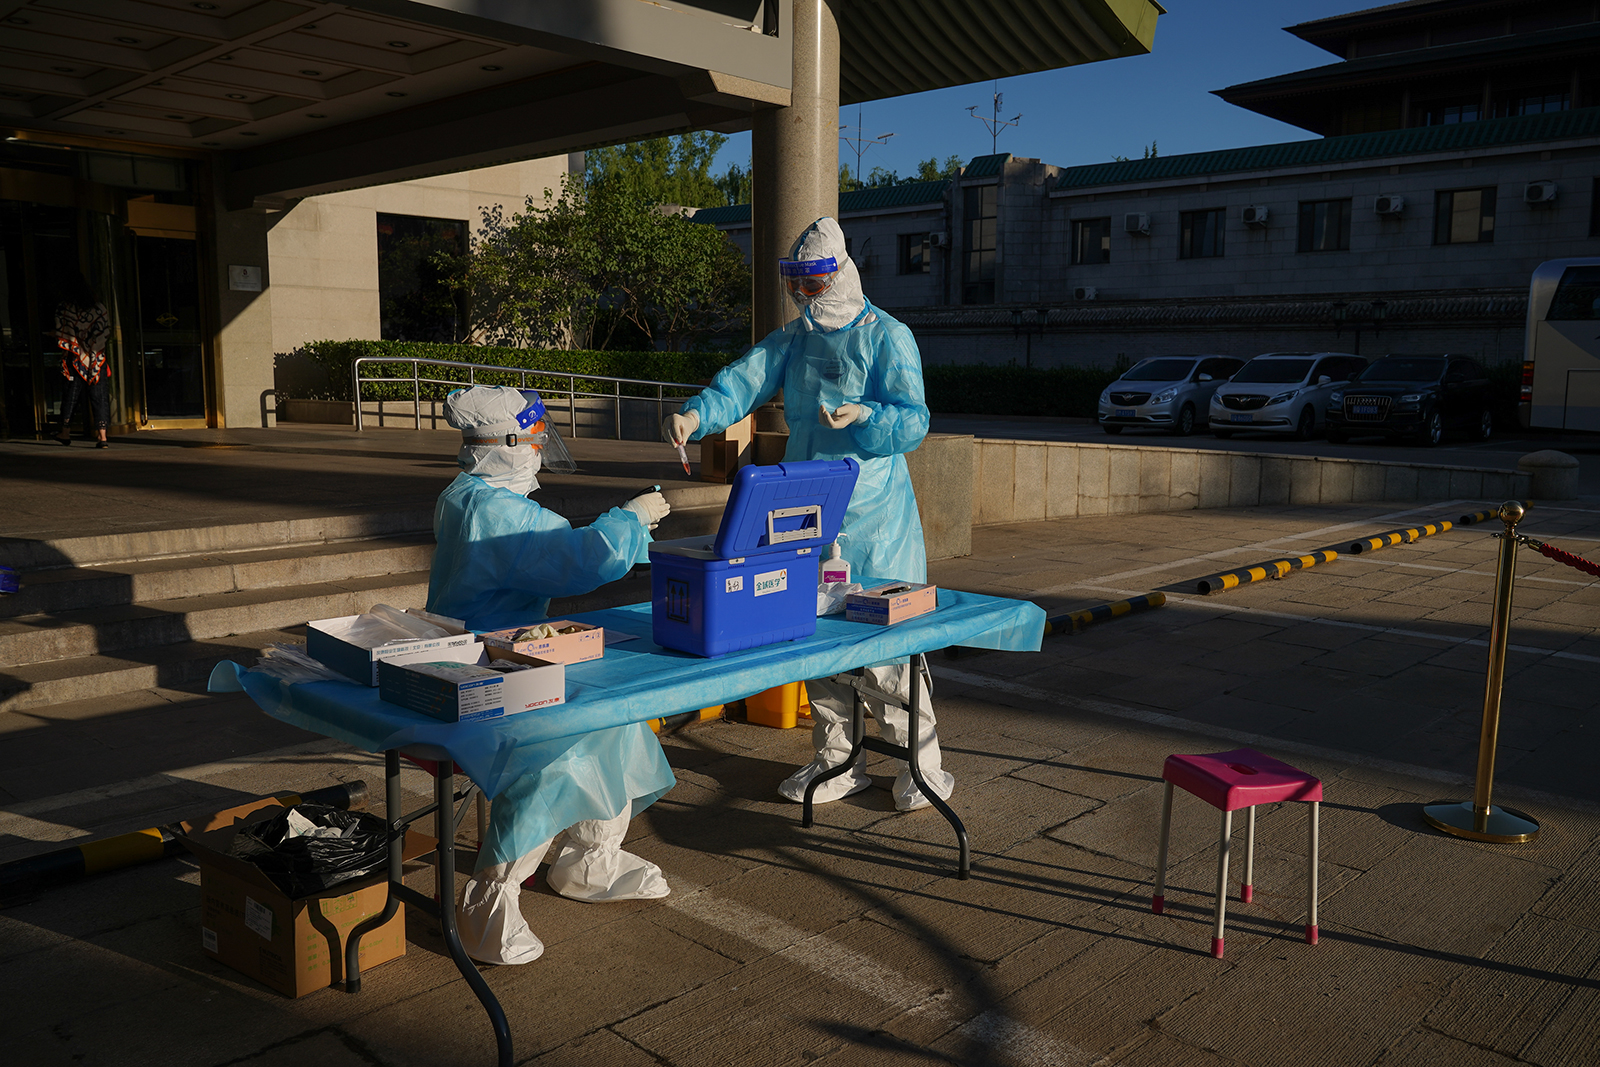 Medical staff prepare to carry out Covid-19 tests on journalists on May 27, at a hotel in Beijing, China.